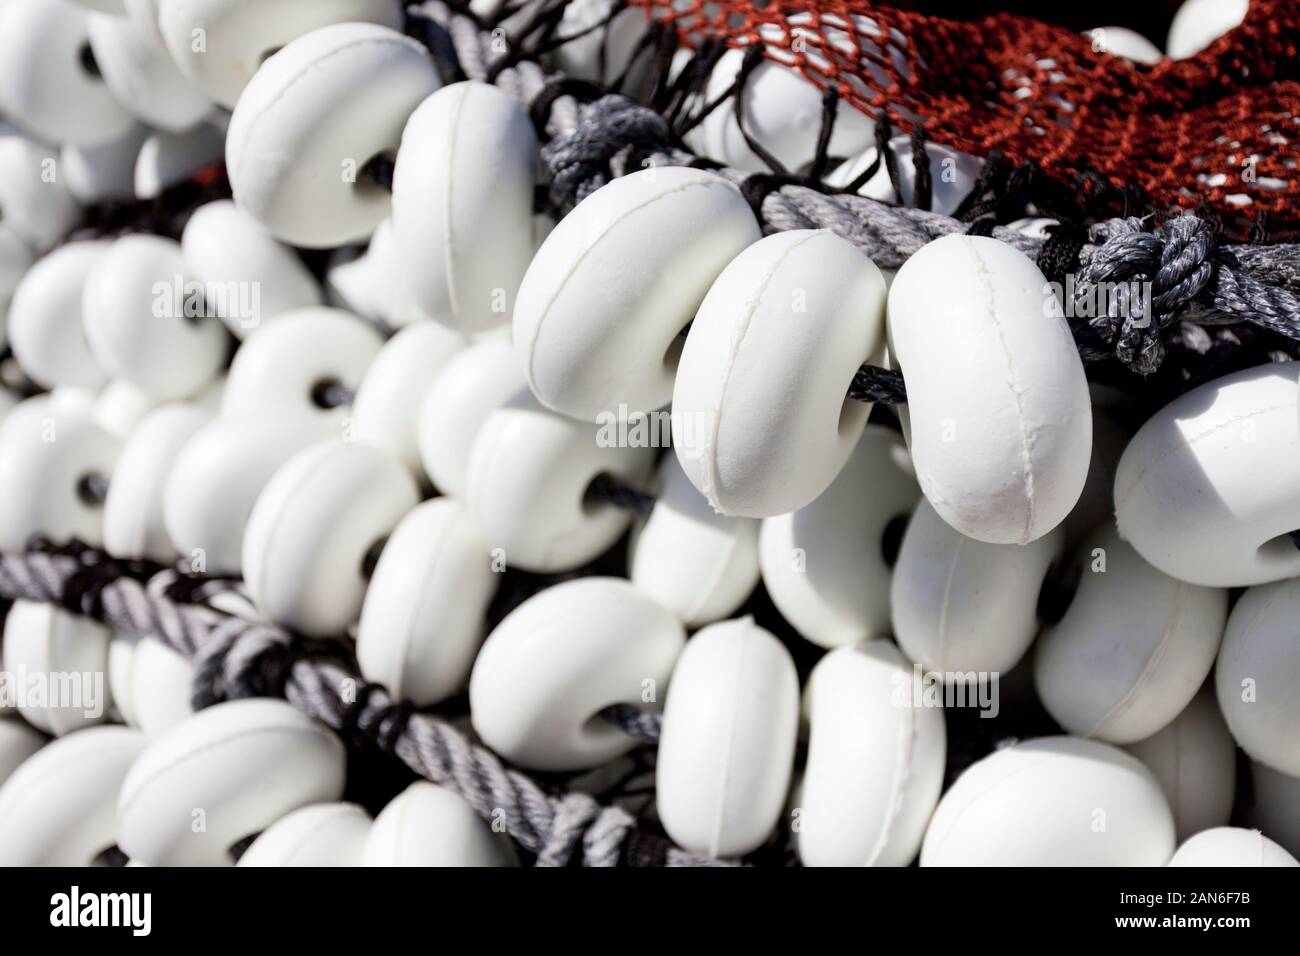 Fishing gear accessories for the fishing net Stock Photo - Alamy